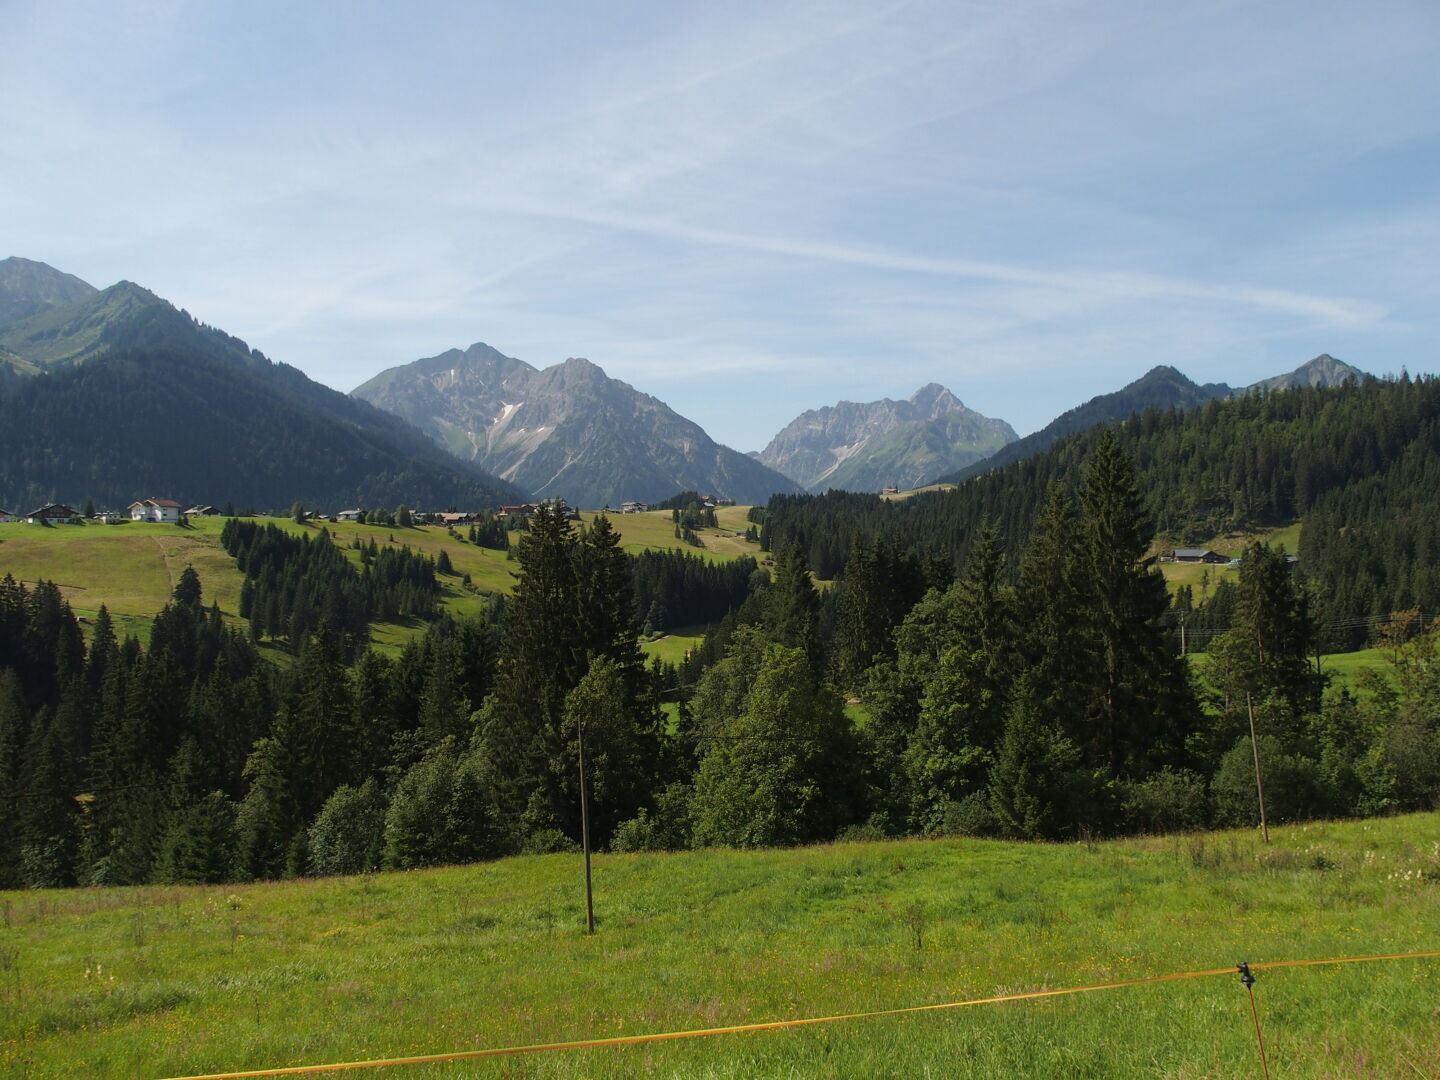 Hiking in the Kleinwalsertal on the border between Austria and Germany. The weather forecast predicts 35 degrees and no rain.